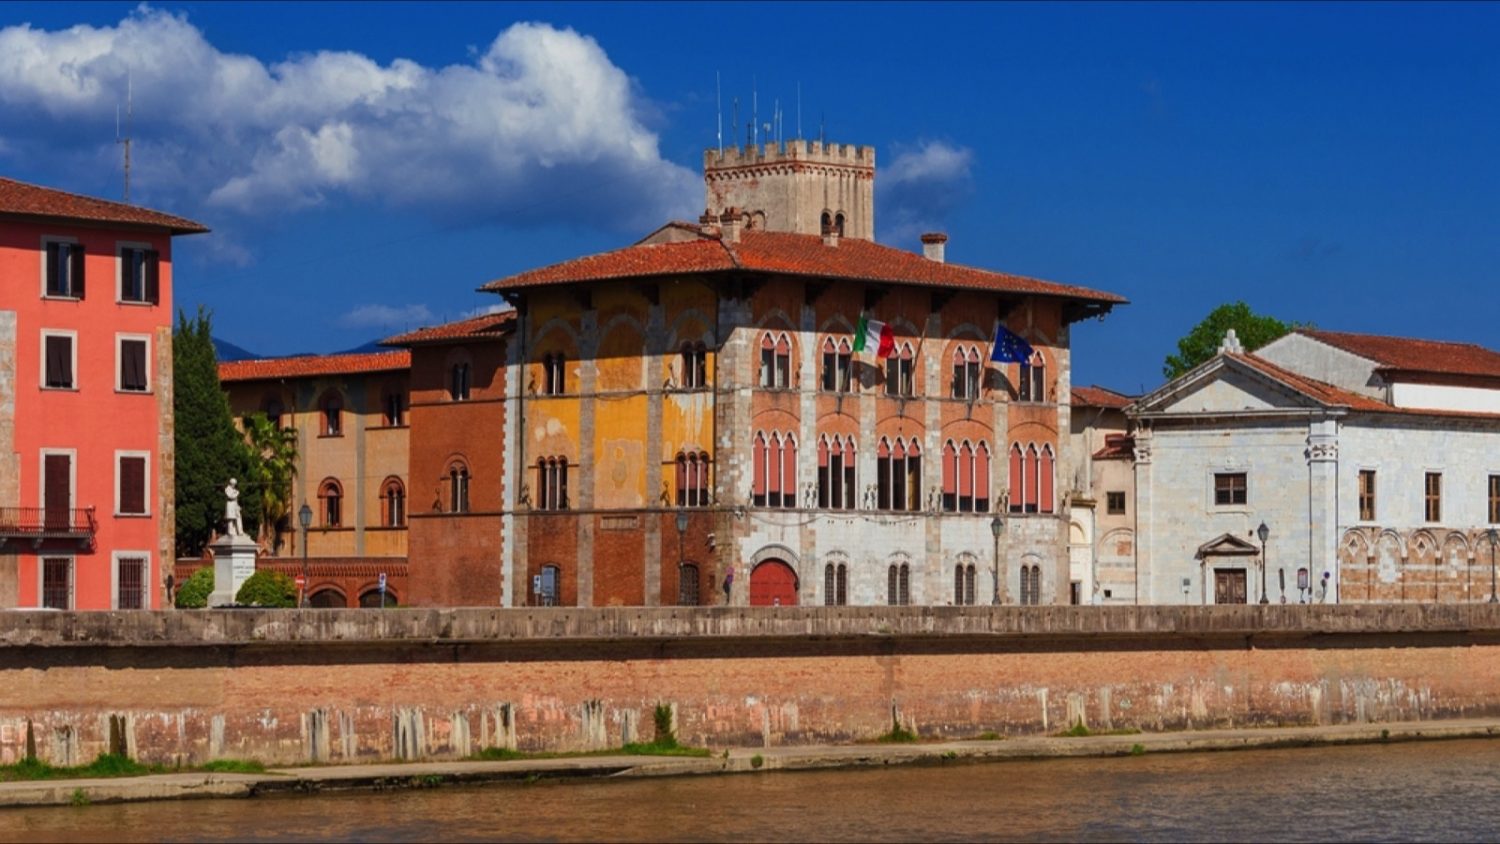 PISA, ITALY - APRIL 27, 2022: Palazzo Medici and National Museum of San Matteo along River Arno waterfront in Pisa